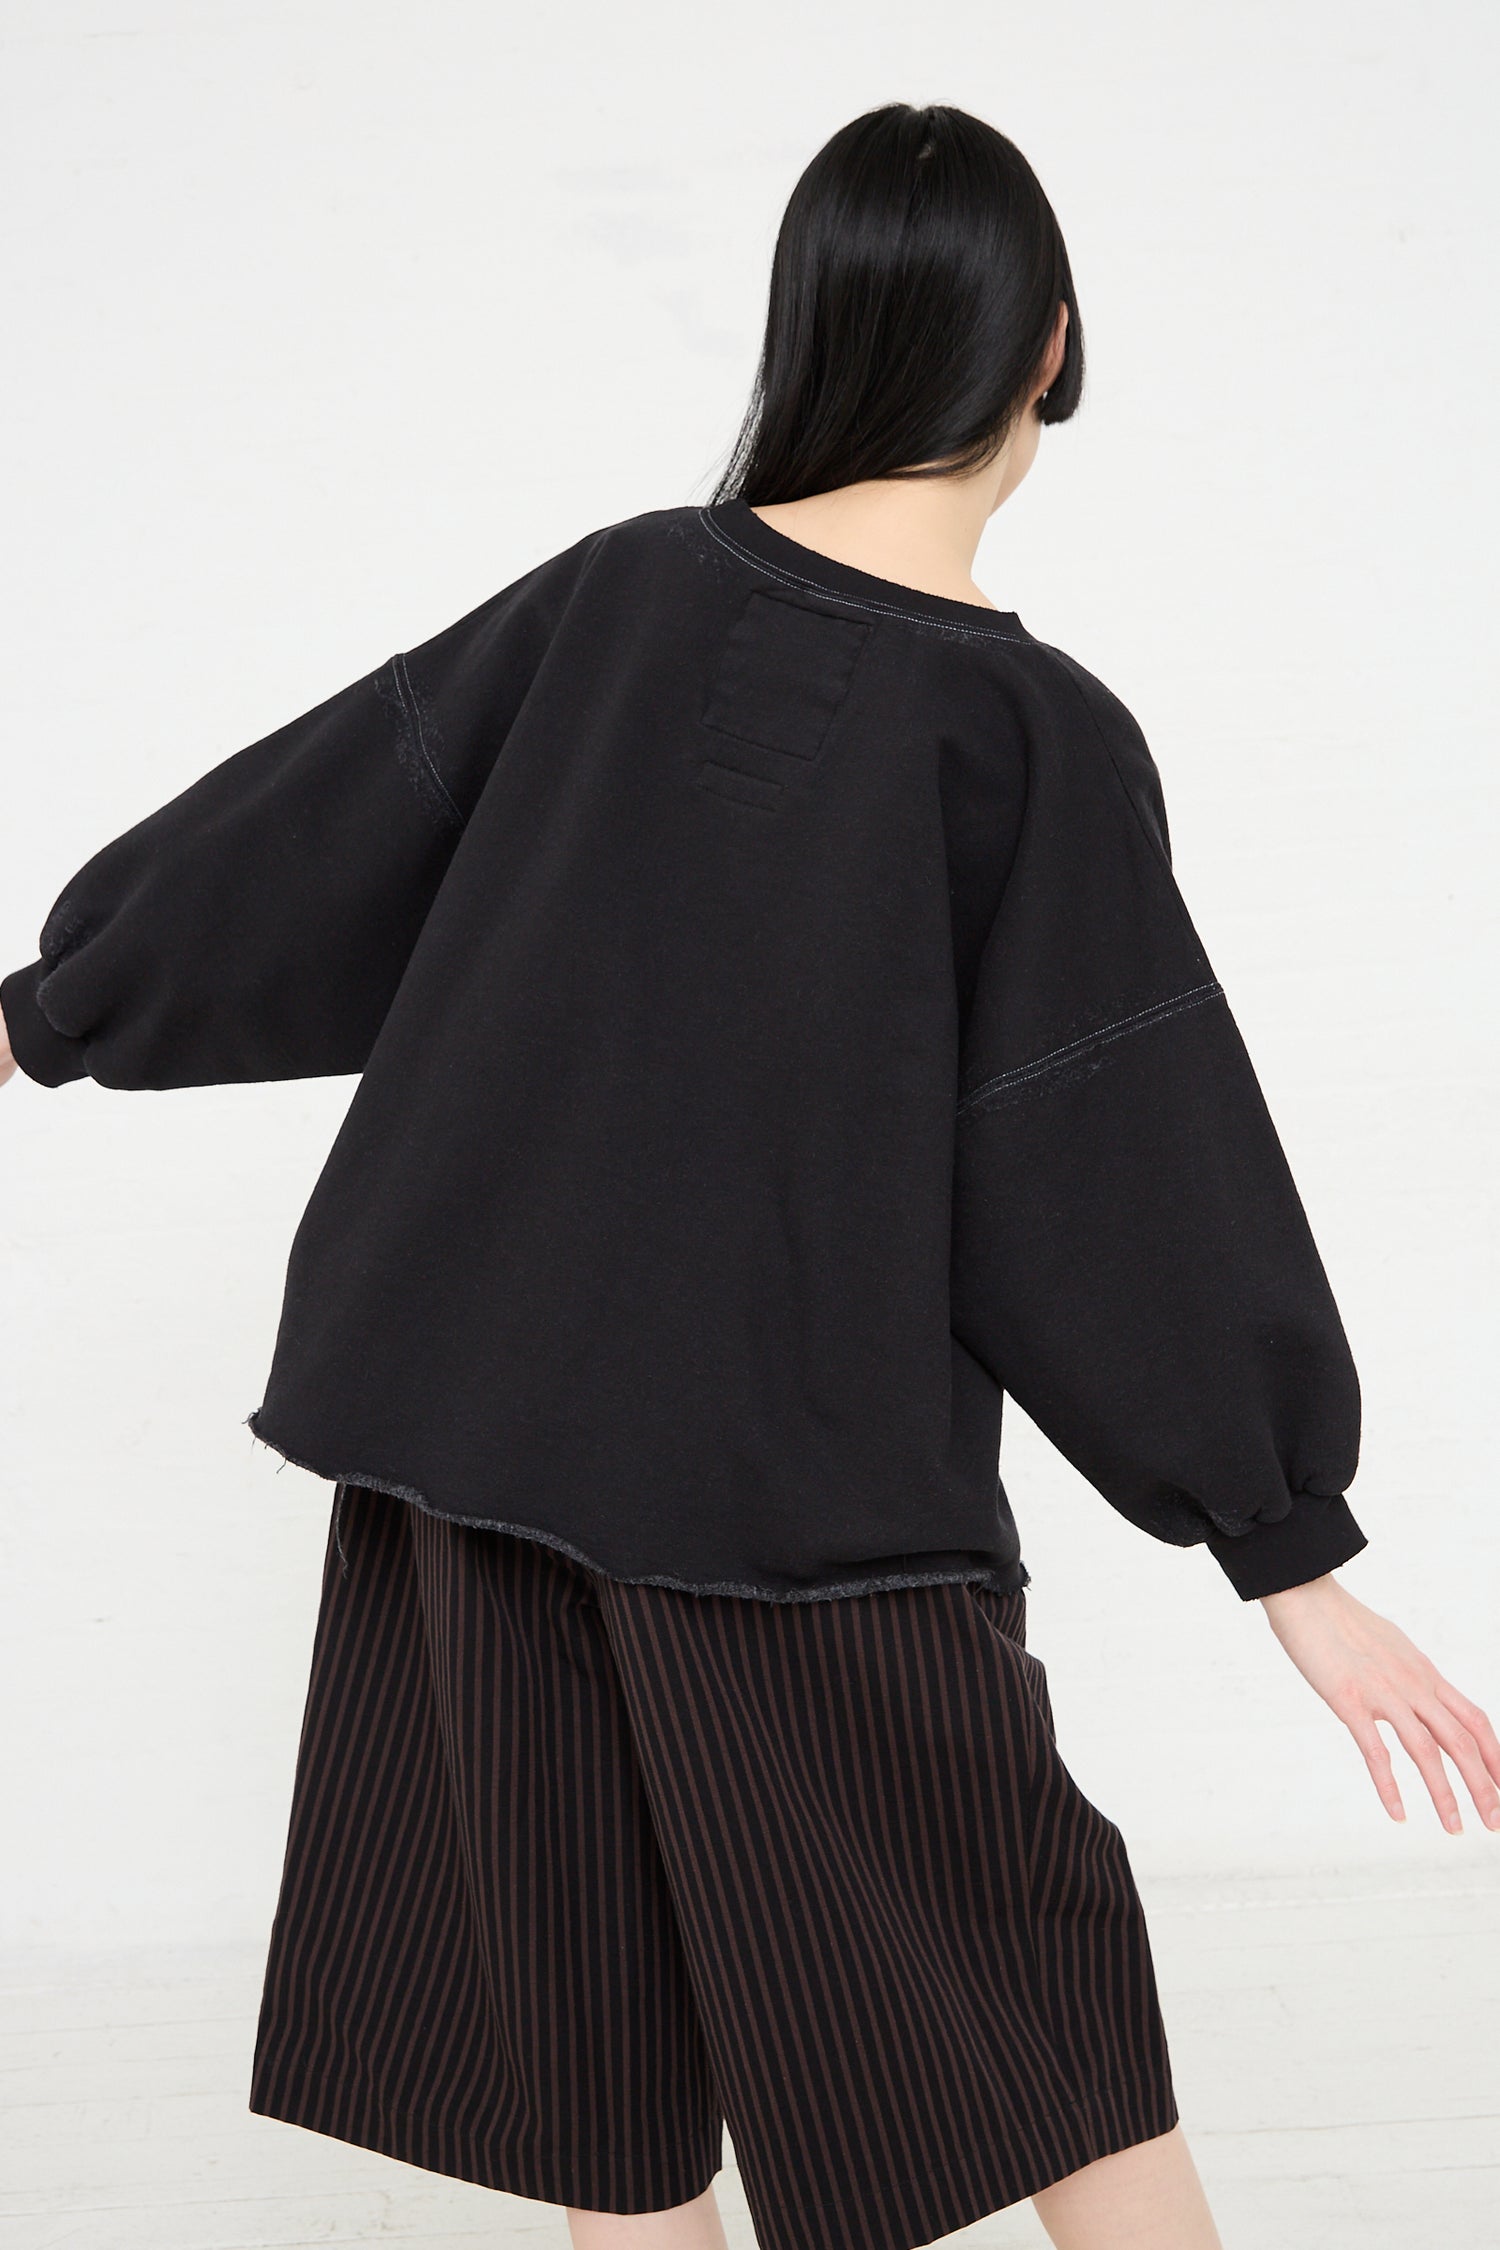 A person from behind wearing a Rachel Comey Fond Sweatshirt in Charcoal, a genderless oversized sweatshirt made of black cotton blend, and striped shorts.